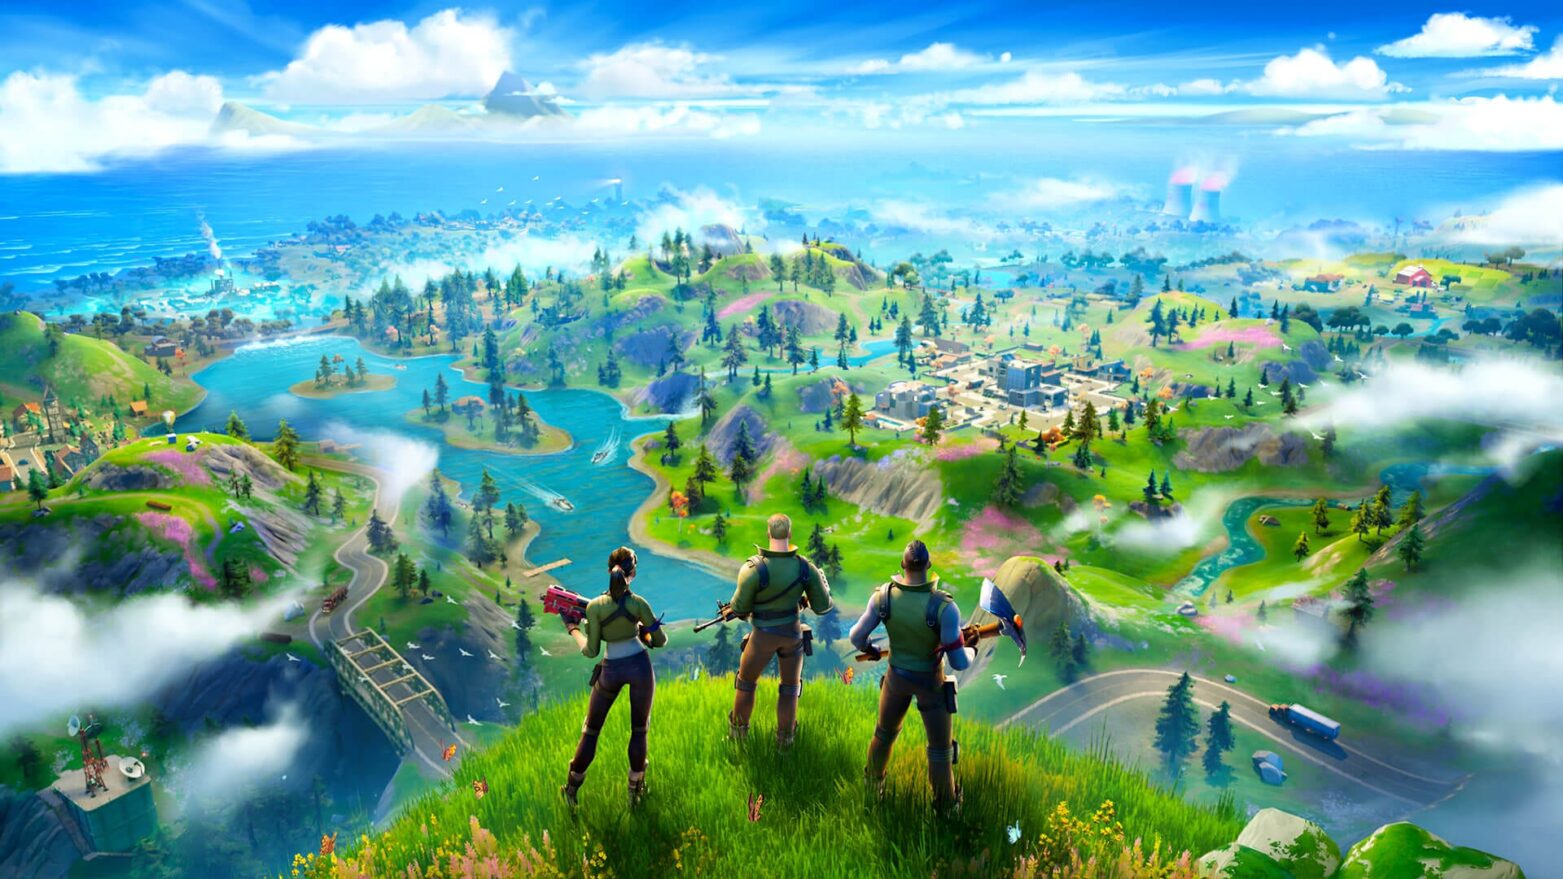 The main goal in Fortnite is being the last person, team, or squad left alive.